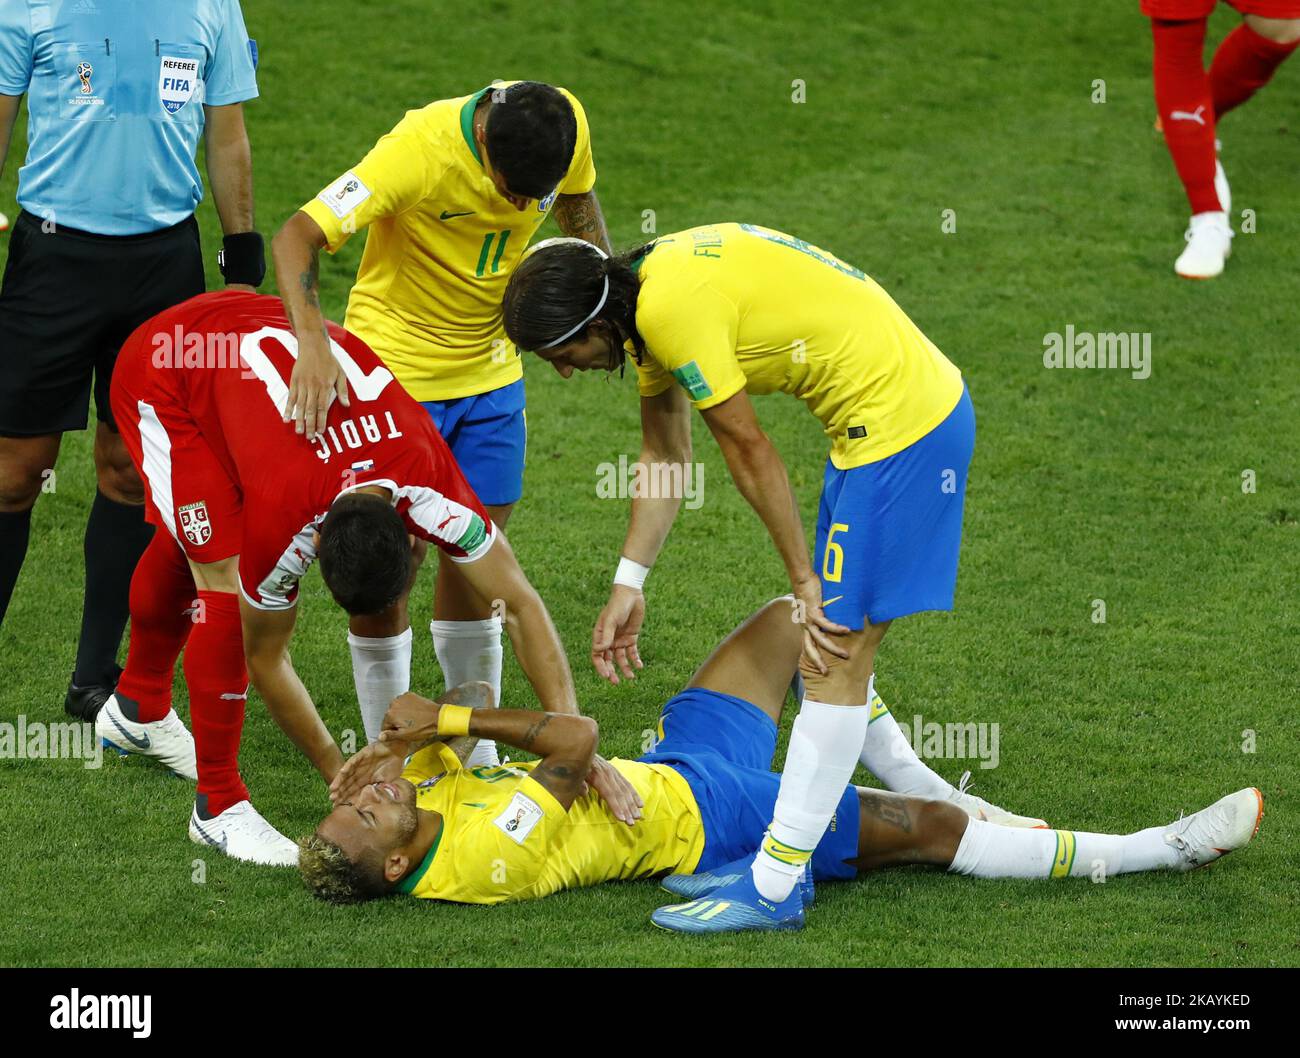 Group E Serbia v Brazil - FIFA World Cup Russia 2018 Neymar (Brazil) and Dusan Tadic (Serbia) after a tackle at Spartak Stadium in Moscow, Russia on June 27, 2018. (Photo by Matteo Ciambelli/NurPhoto)  Stock Photo